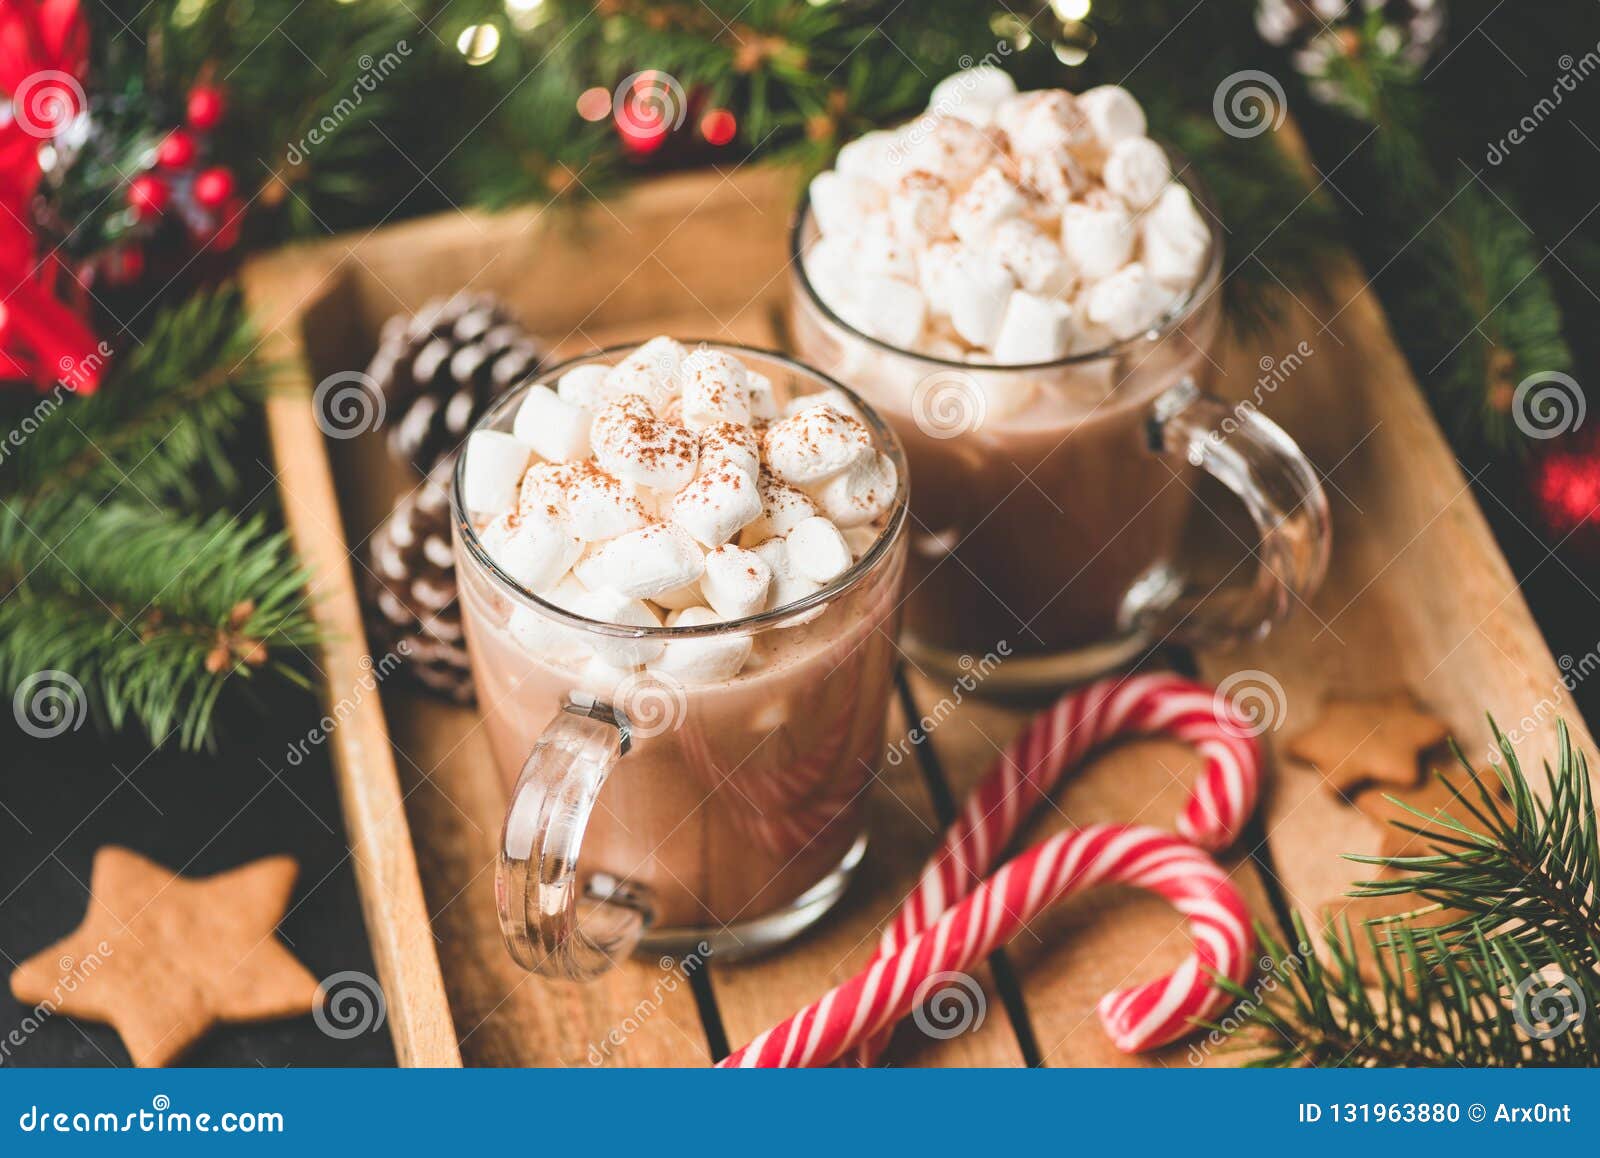 hot chocolate with marshmallows, warm cozy christmas drink